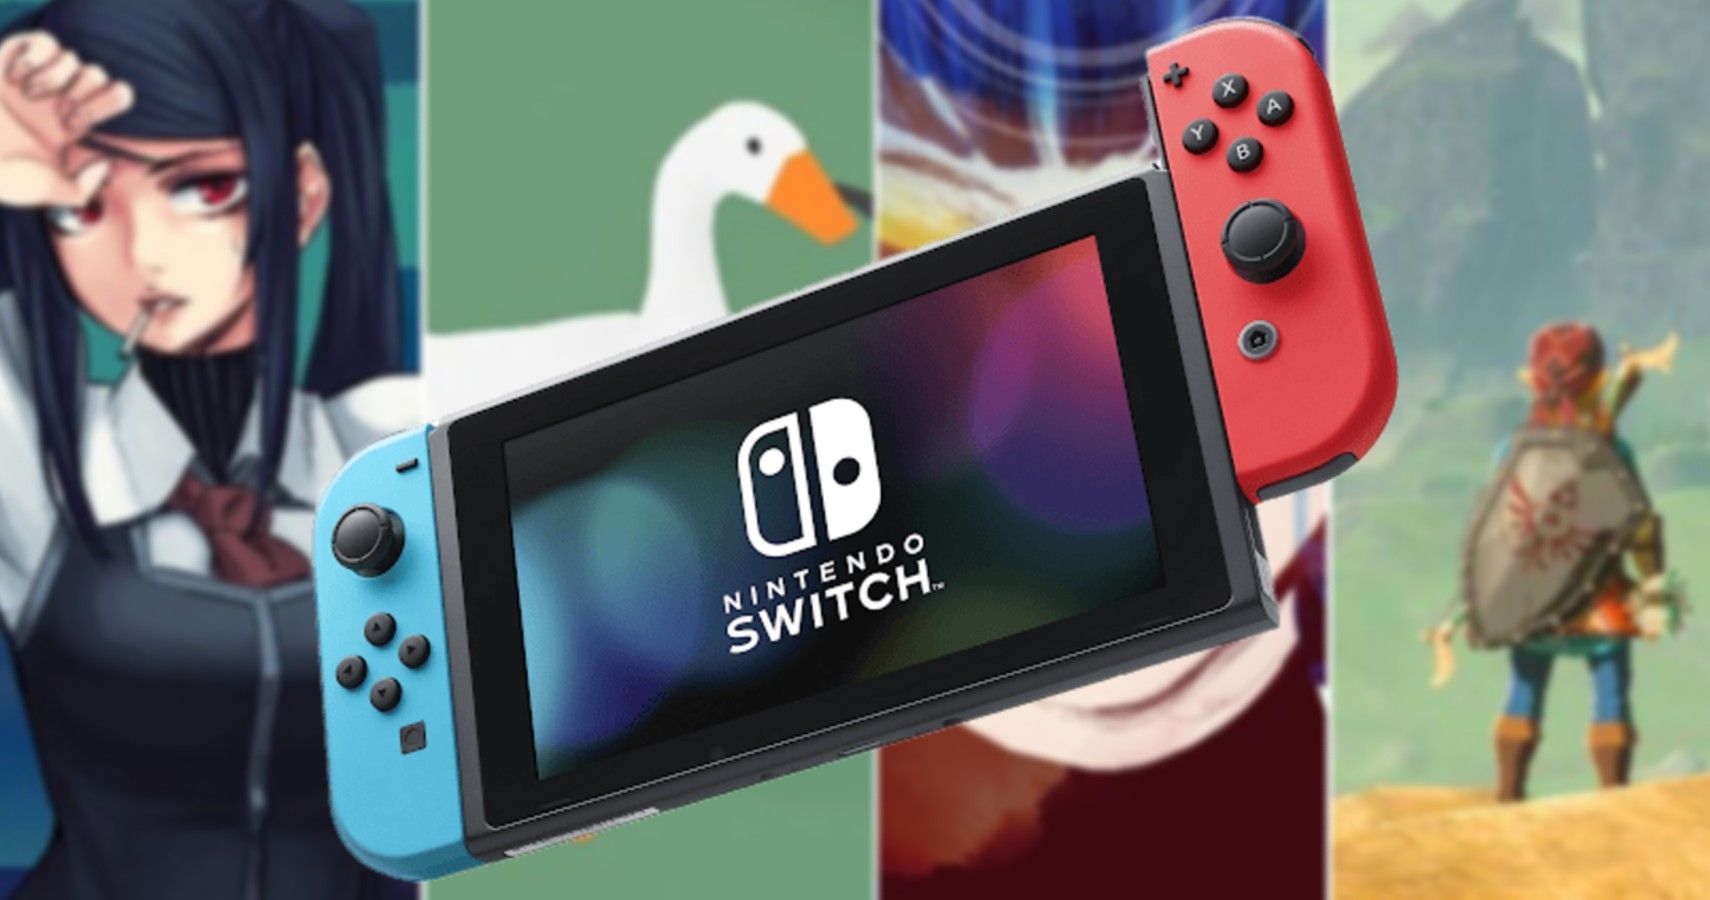 The Pokémon games on Nintendo Switch look like a dream come true